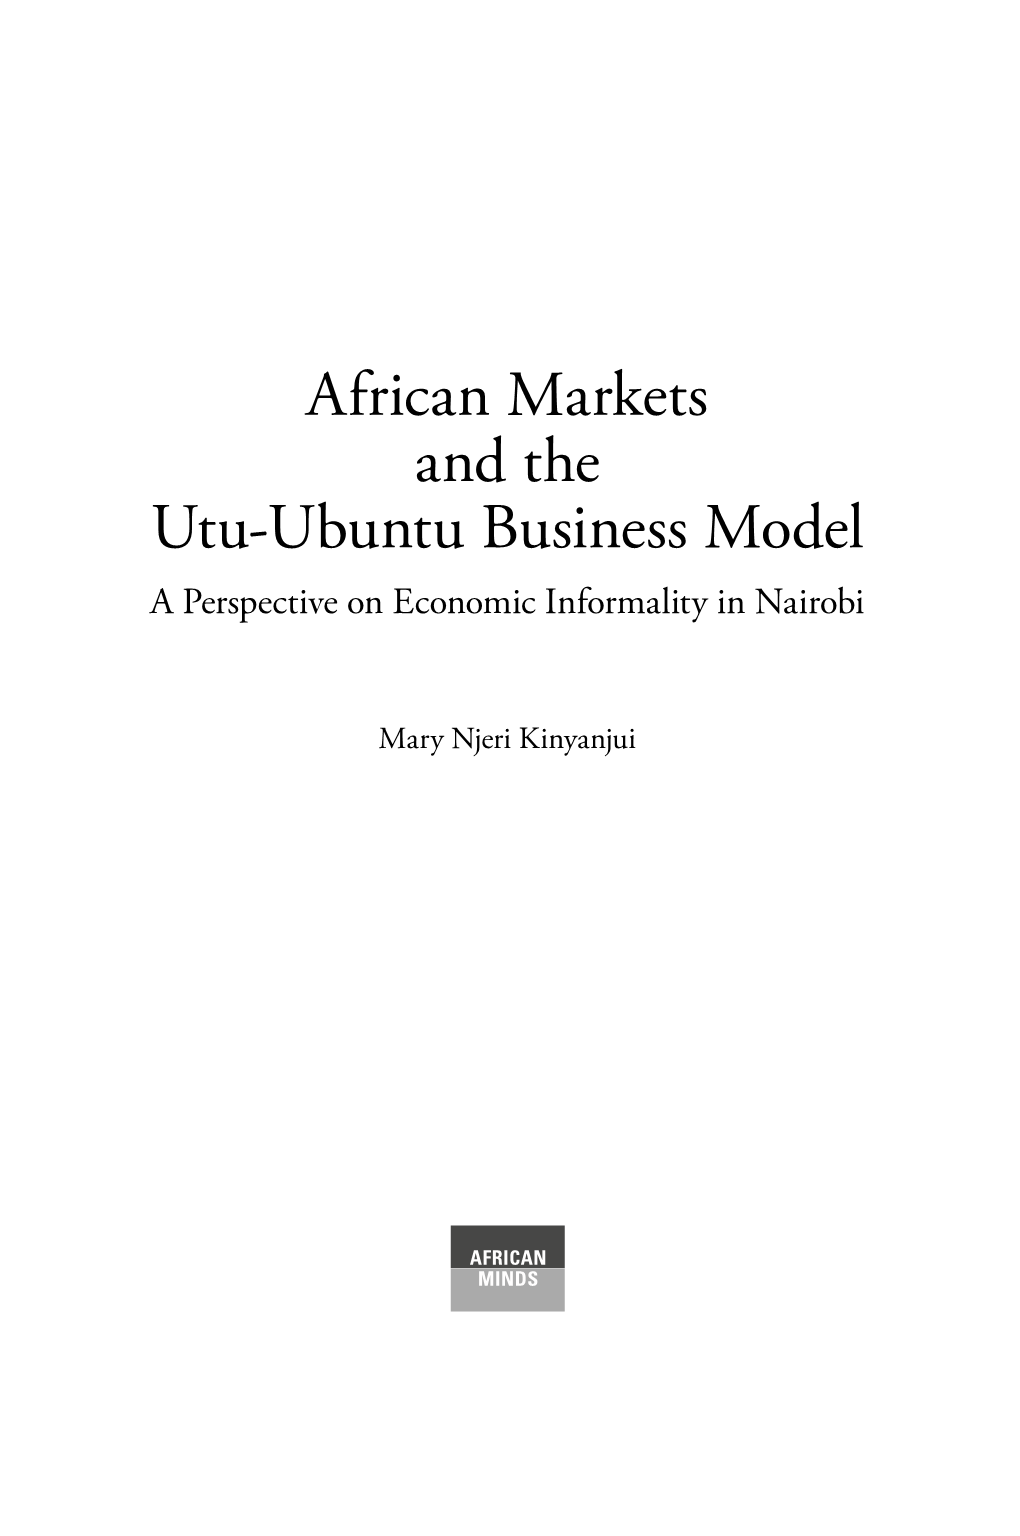 African Markets and the Utu-Ubuntu Business Model a Perspective on Economic Informality in Nairobi